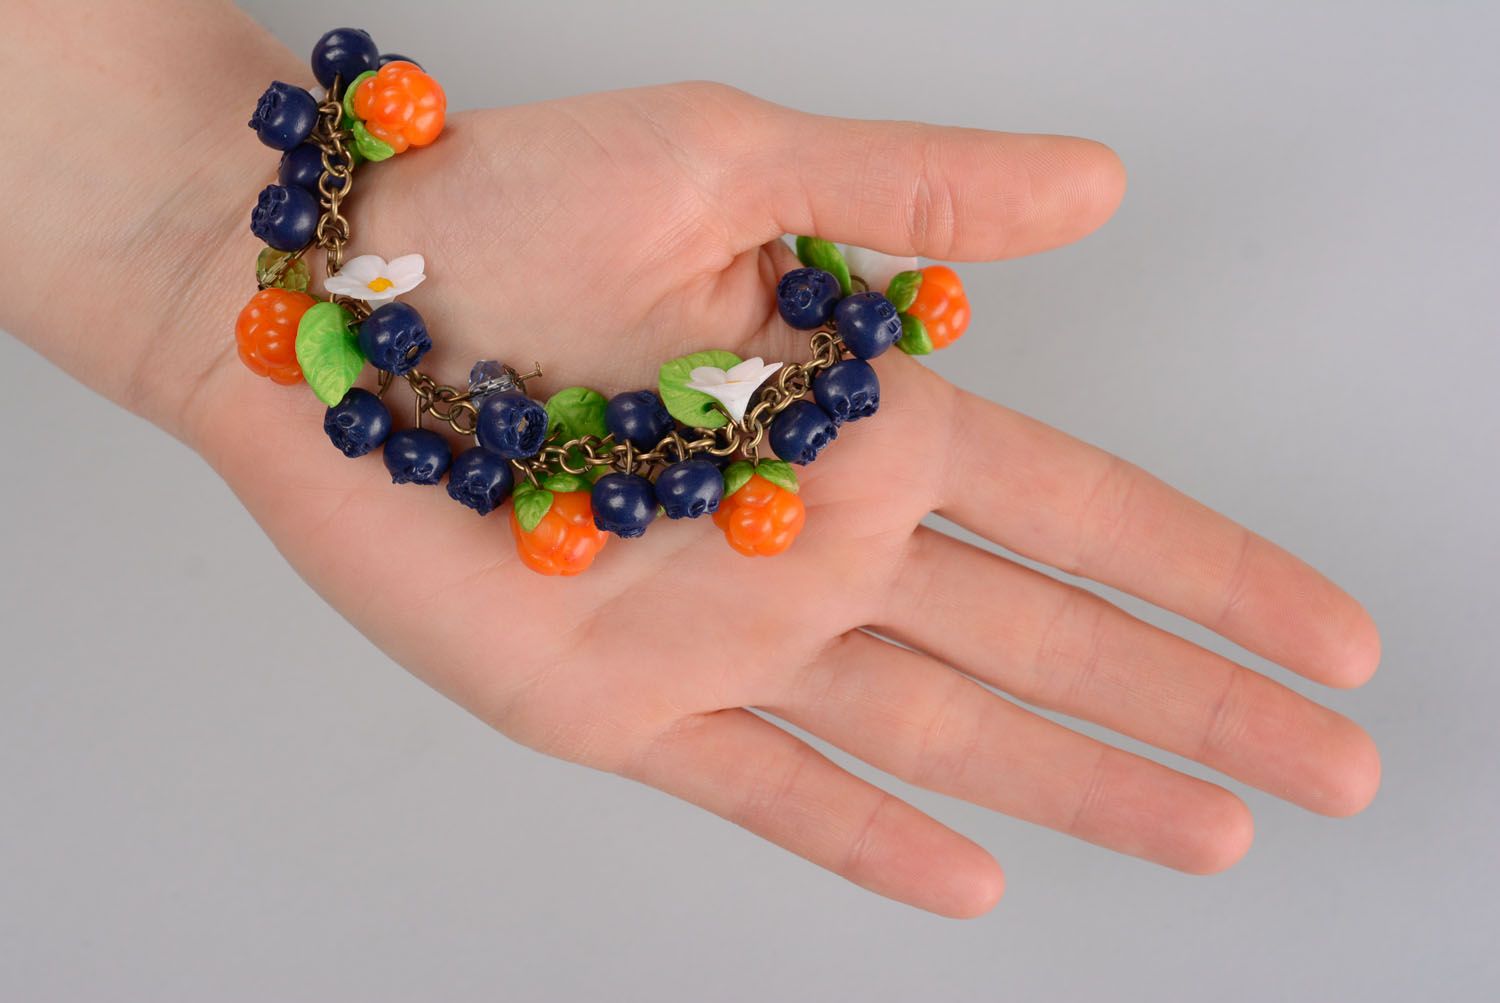 Plastic bracelet with flowers and berries photo 2